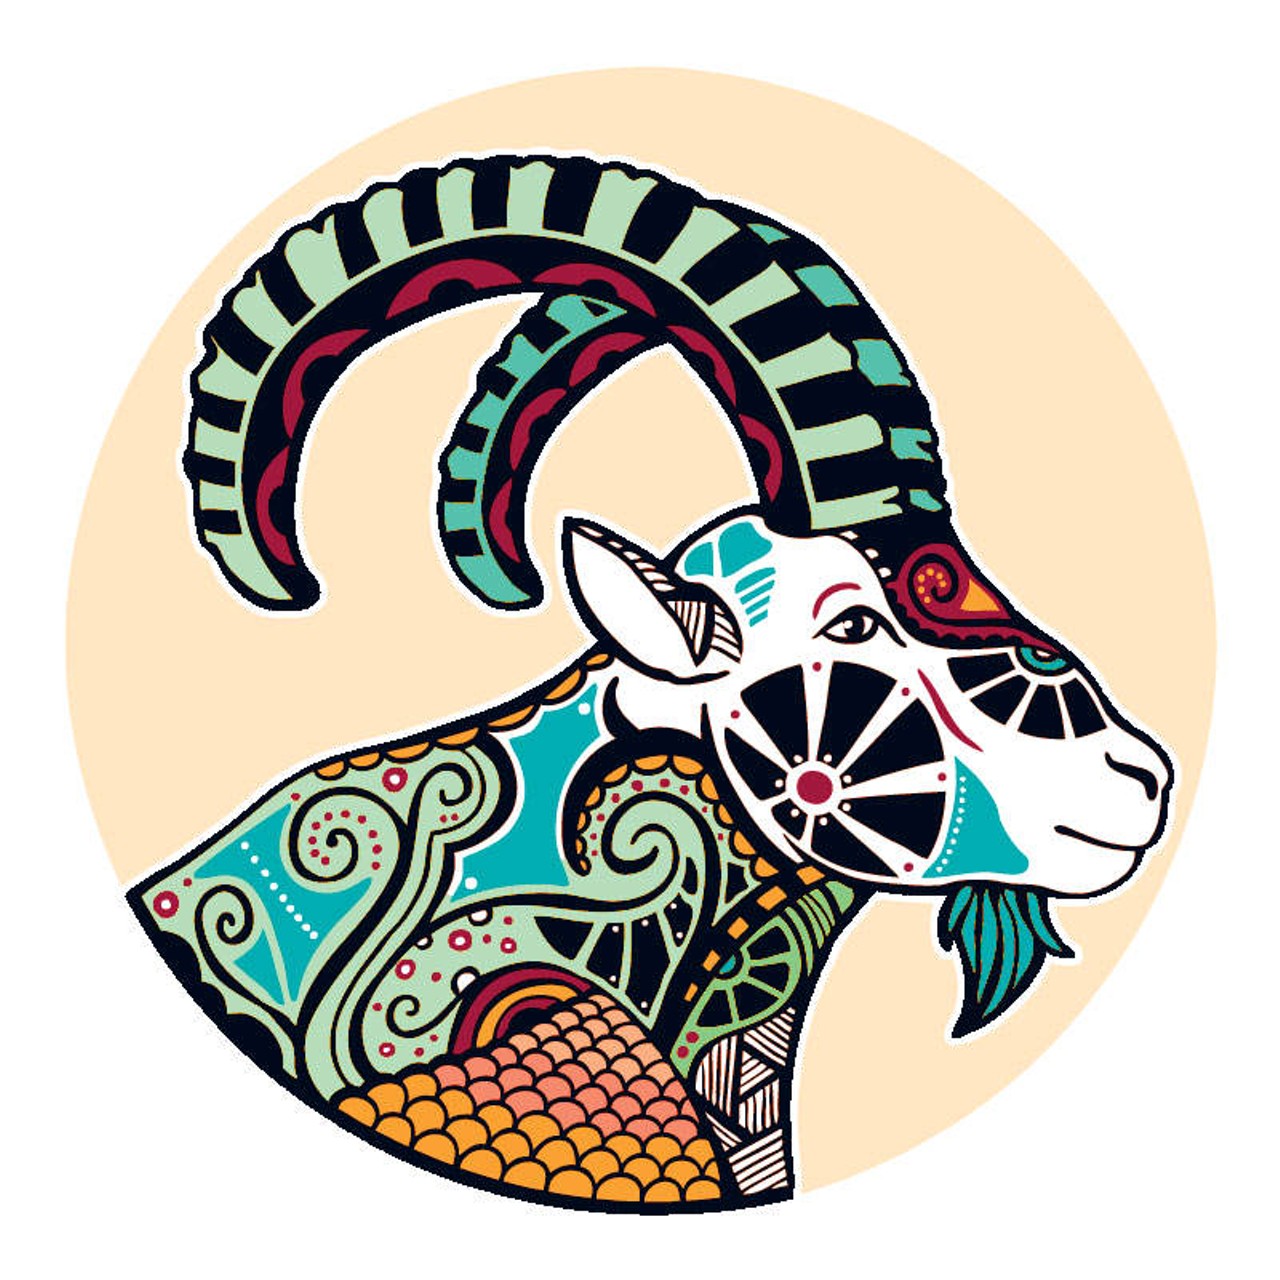 CAPRICORN (Dec. 21-Jan. 20): 
Too many people and things have gone under the bridge for you to be dwelling on anything but what&#146;s in front of you now. The slate is clear and you&#146;re starting out fresh. Some of you are totally certain about where to direct your energy and will be on a roll for the next three months. Your plans will pass or fail depending on their relevance. Those of you who have no clue what lies on the road ahead, or what form things will take, never fear. This is one of those times when you don&#146;t need to have a plan. Just keep paying attention and trust your gut to show you the way.